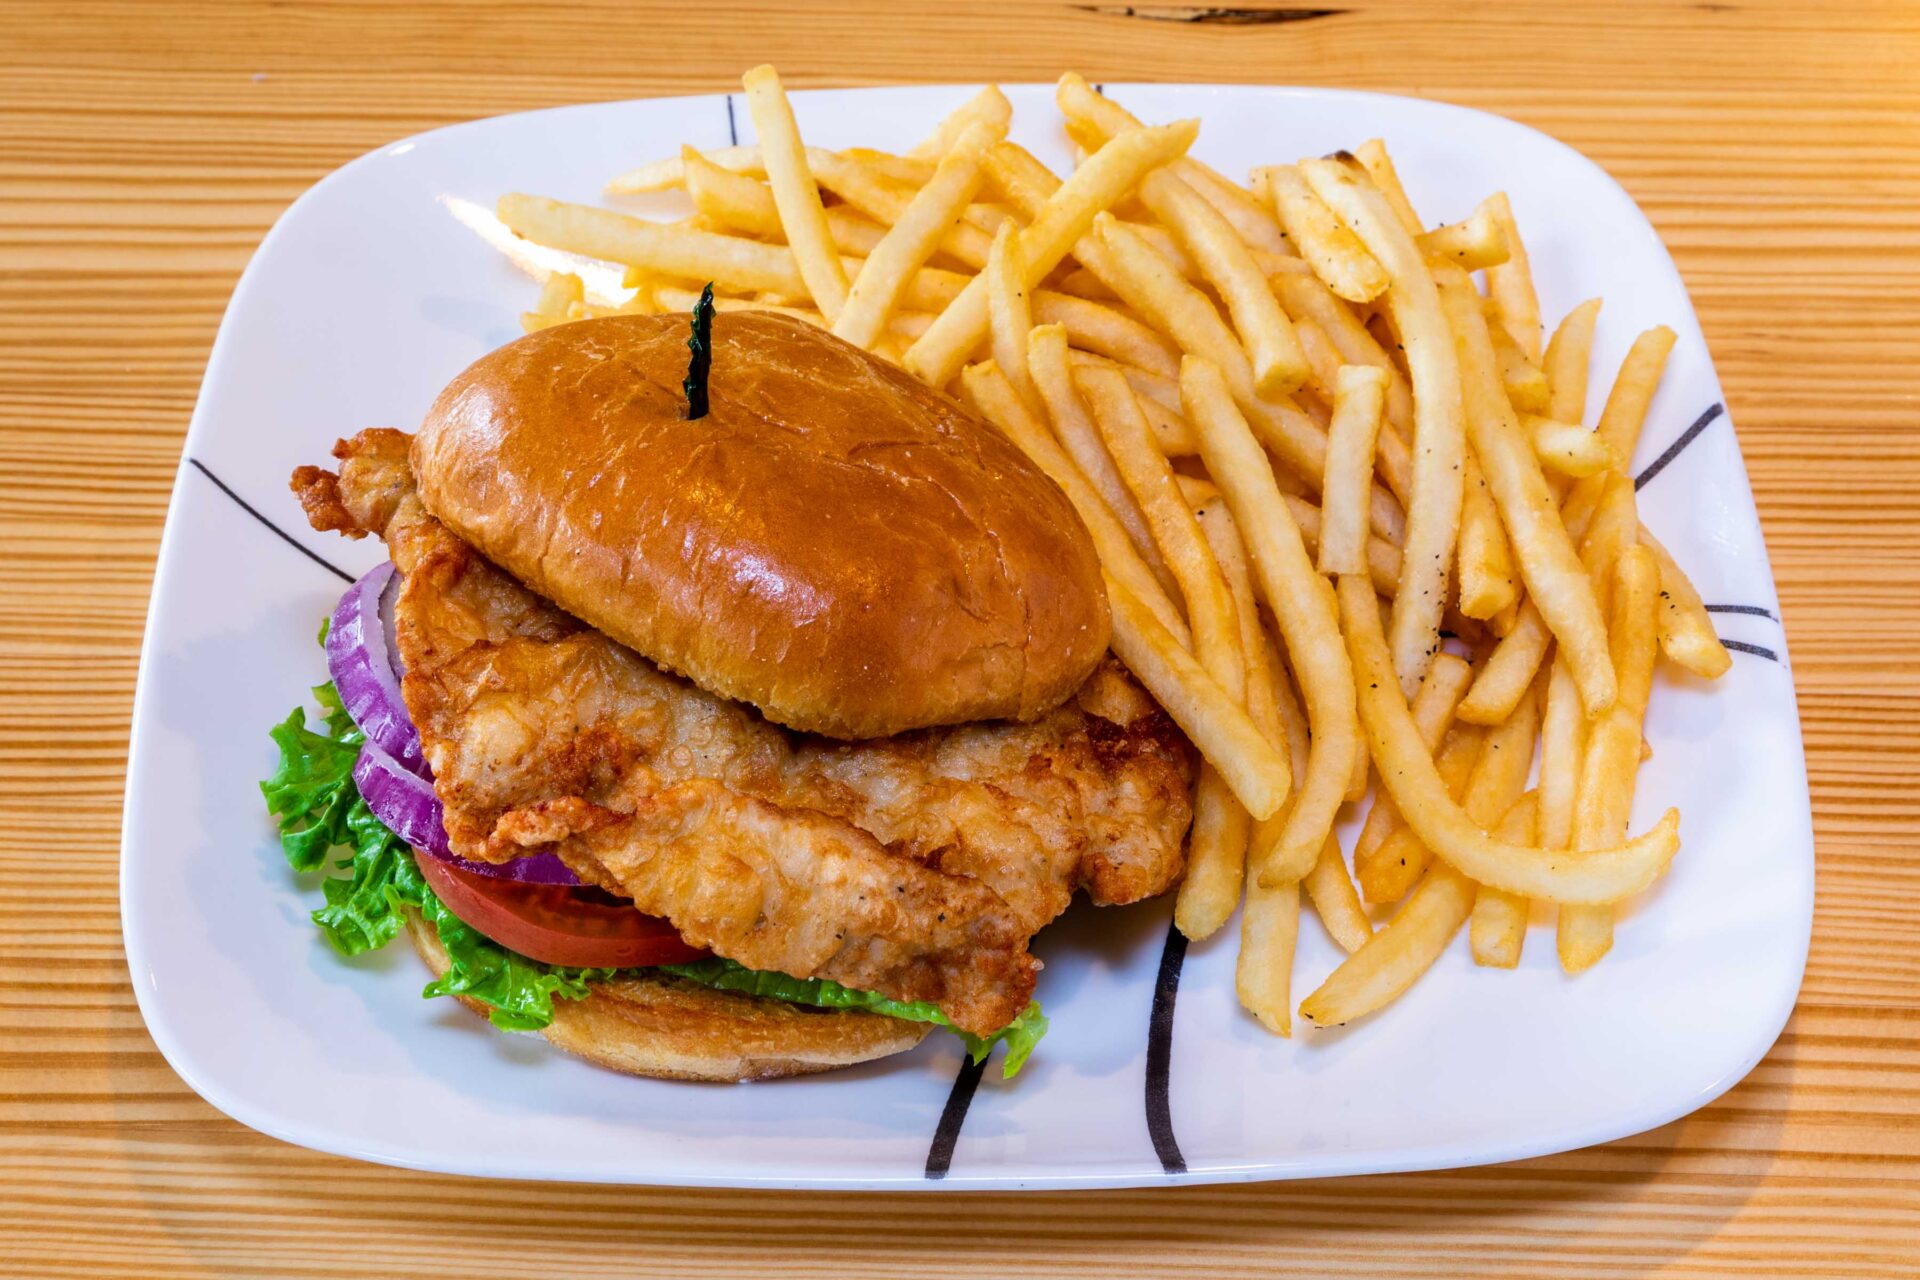 A plate of food with fries and chicken sandwich.